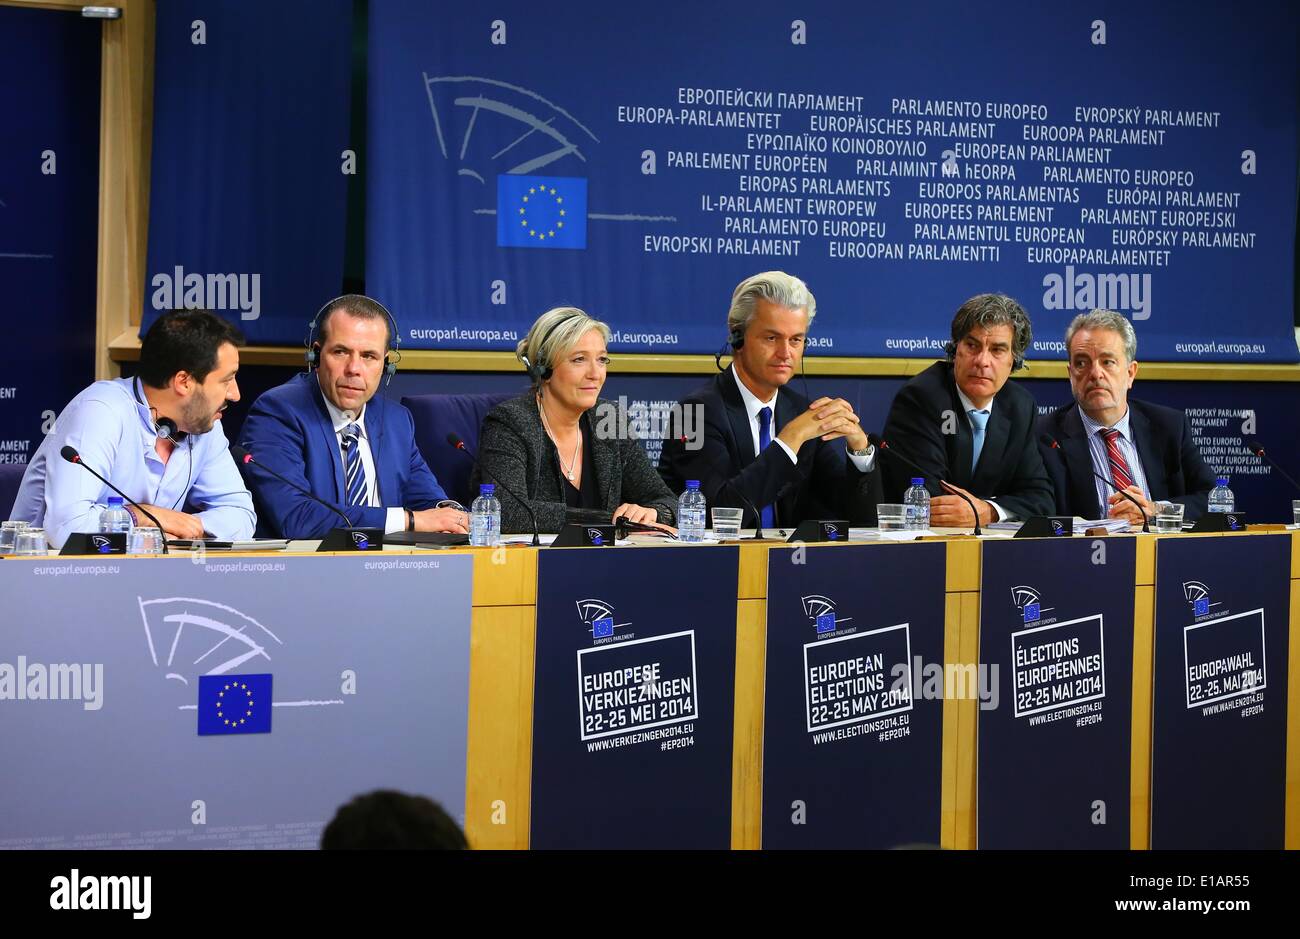 Brussels, Belgium, 28th May, 2014. Marine Le Pen (3rd L), leader of the far-right National Front (NF), attends a press conference at the headquarters of European Union, in Brussels, on May 28, 2014. During the press conference, Le Pen announced a right-wing alliance between the NF and the Northern League (Italy), the Party of Freedom (Netherlands), the Freedom Party of Austria and the Vlaams Belang (Belgium). This alliance is one step for the forming a parliamentary group, but has to meet the criterion that their elected are from at least seven countries.  Credit:  Gong Bing/Xinhua/Alamy Live  Stock Photo